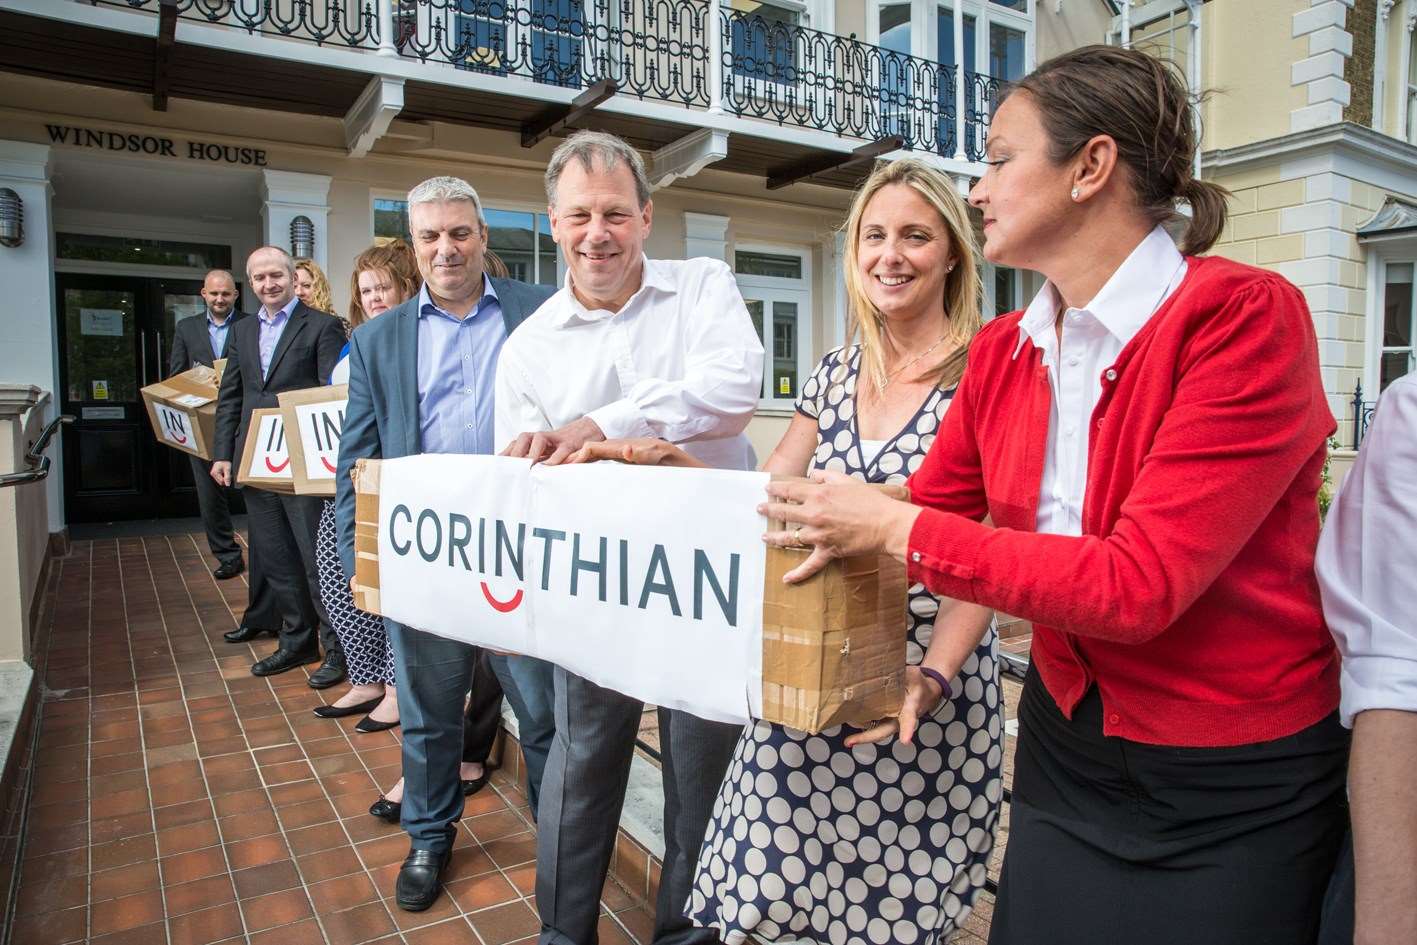 Corinthian has moved to Tunbridge Wells from Croydon and is poised to create 20 jobs